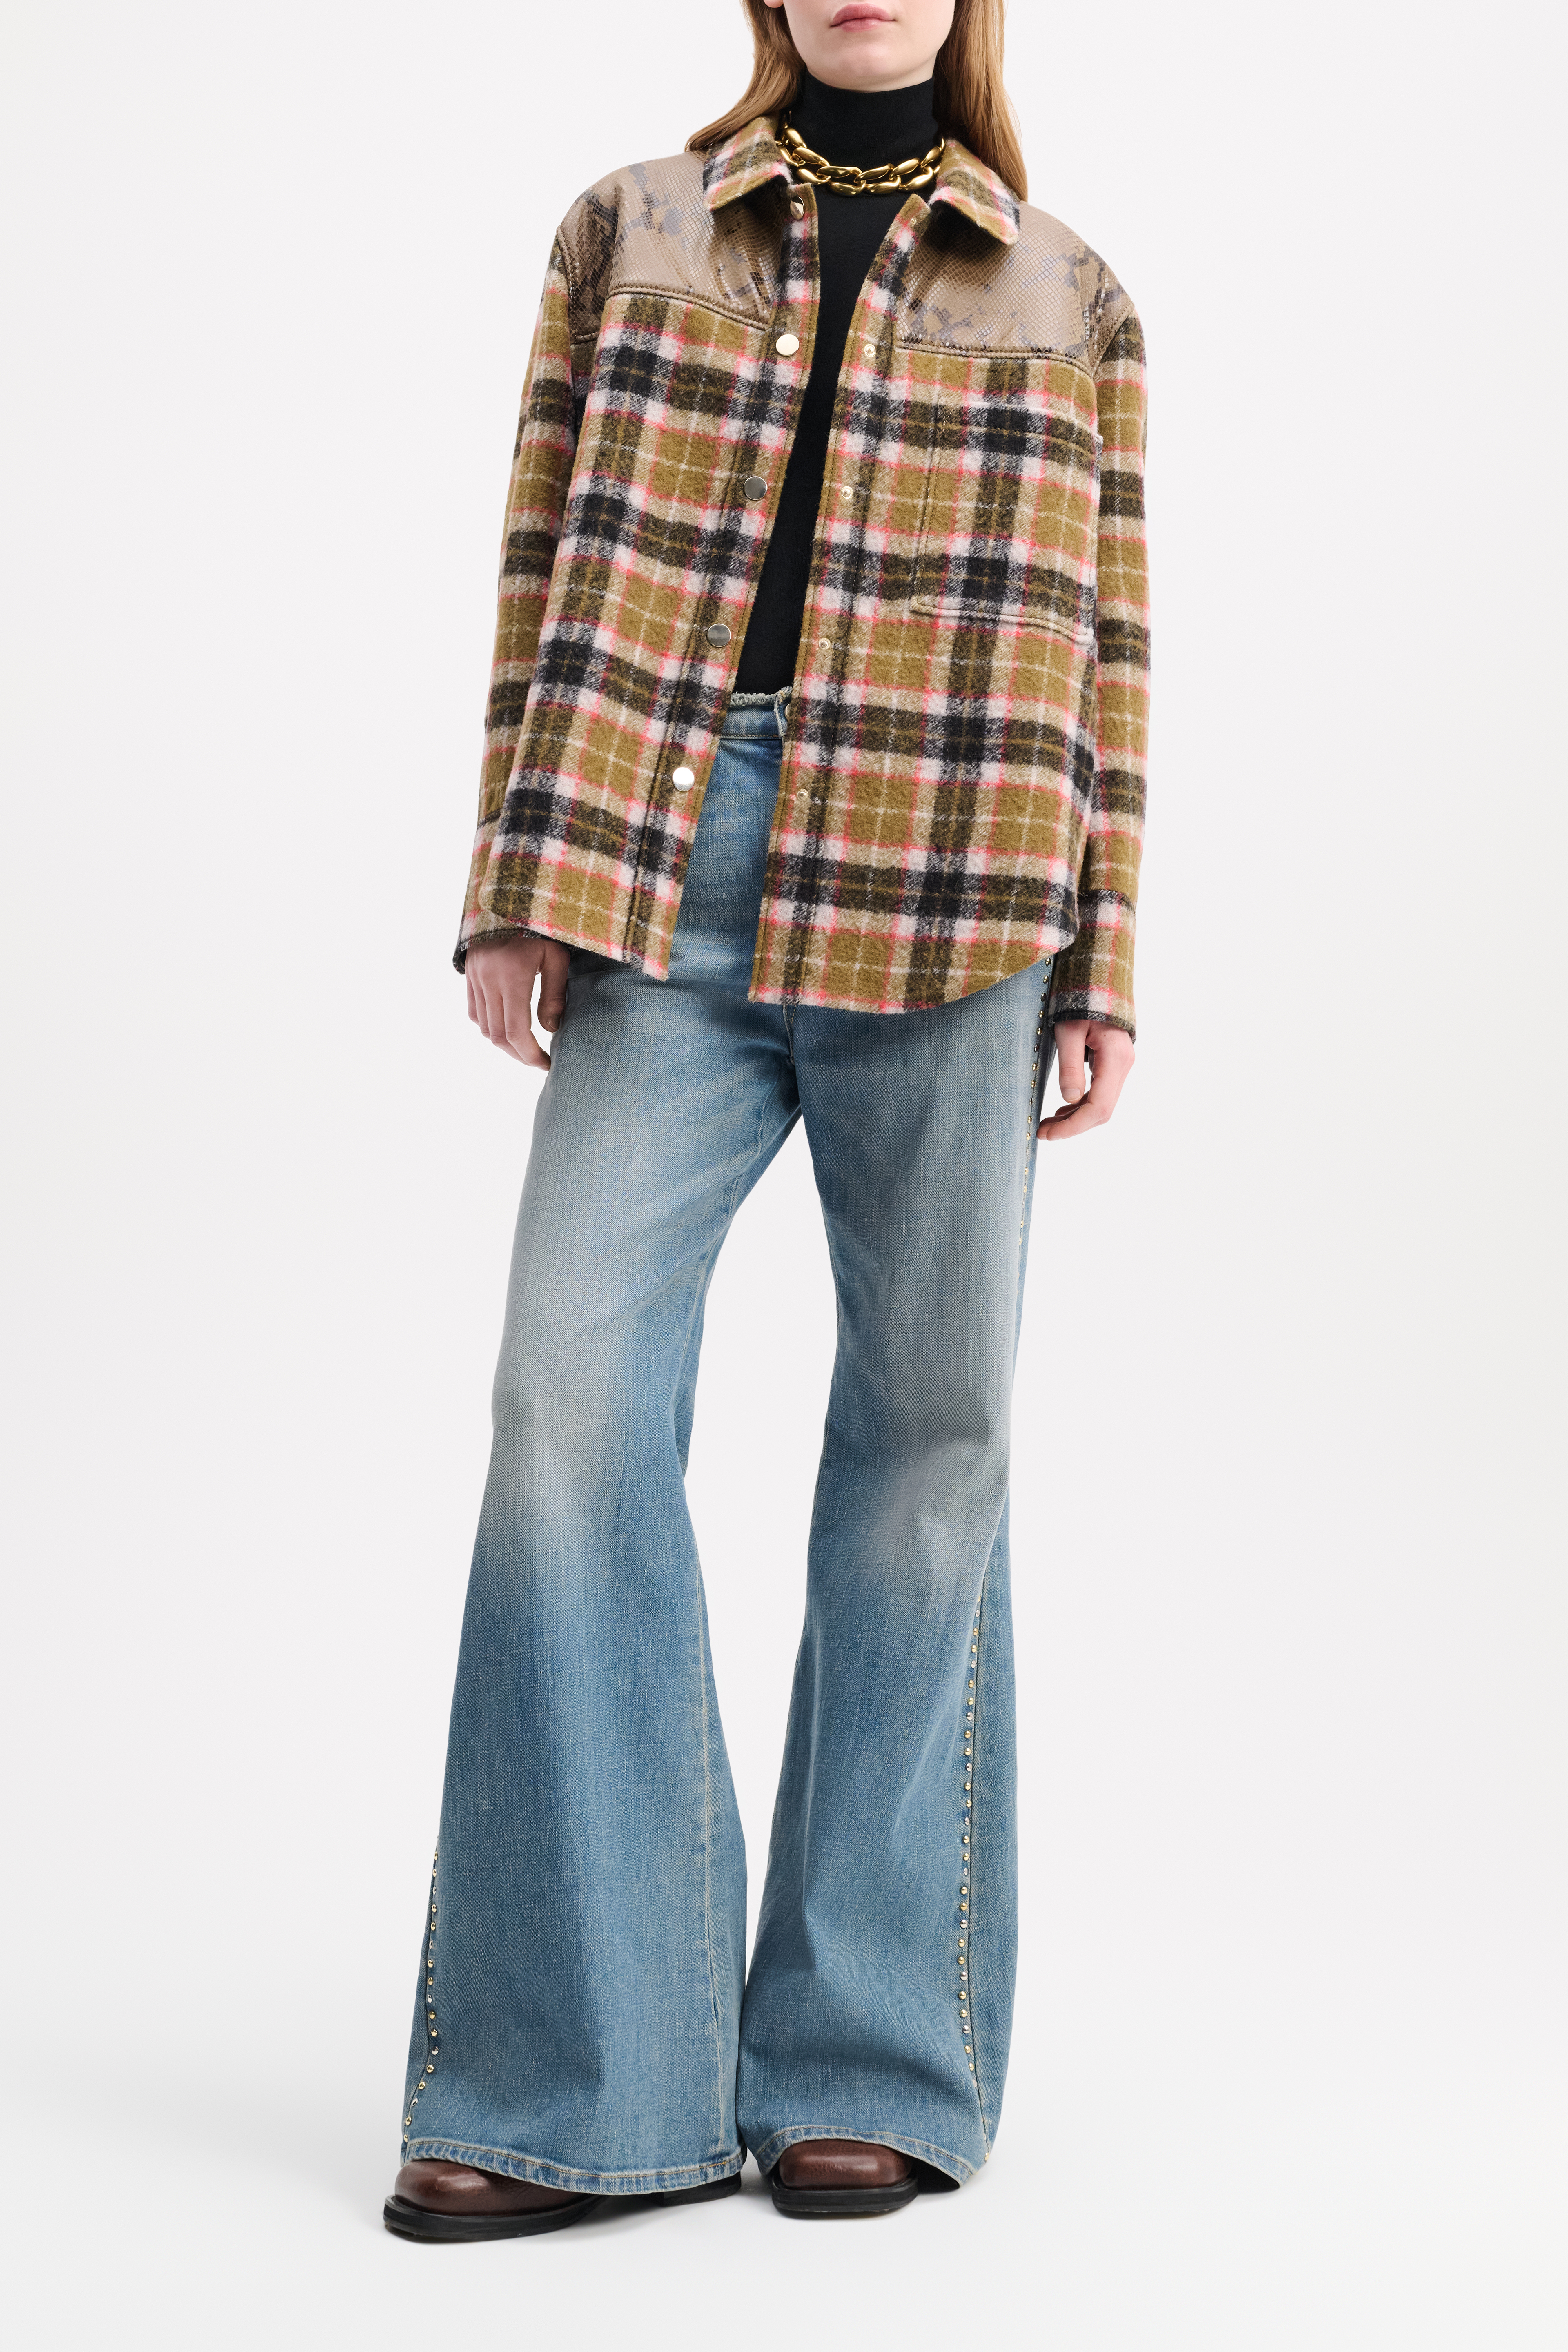 Dorothee Schumacher Plaid shirt-jacket with embossed leather